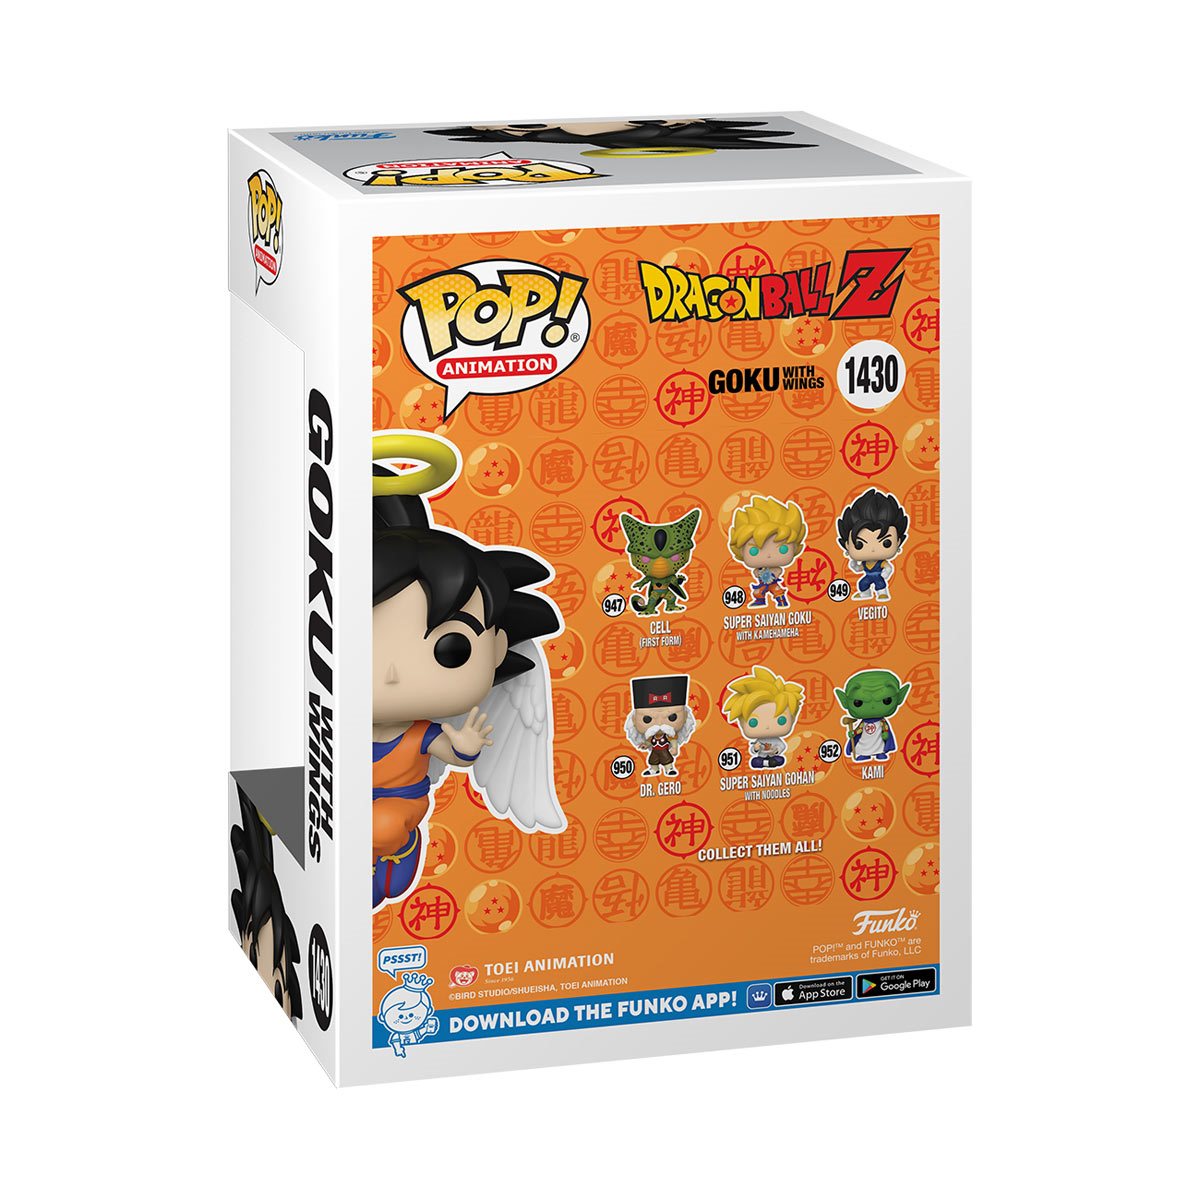 Dragon Ball Z Goku with Wings Funko Pop! Vinyl Figure #1430 - Previews Exclusive back view of the box - Heretoserveyou